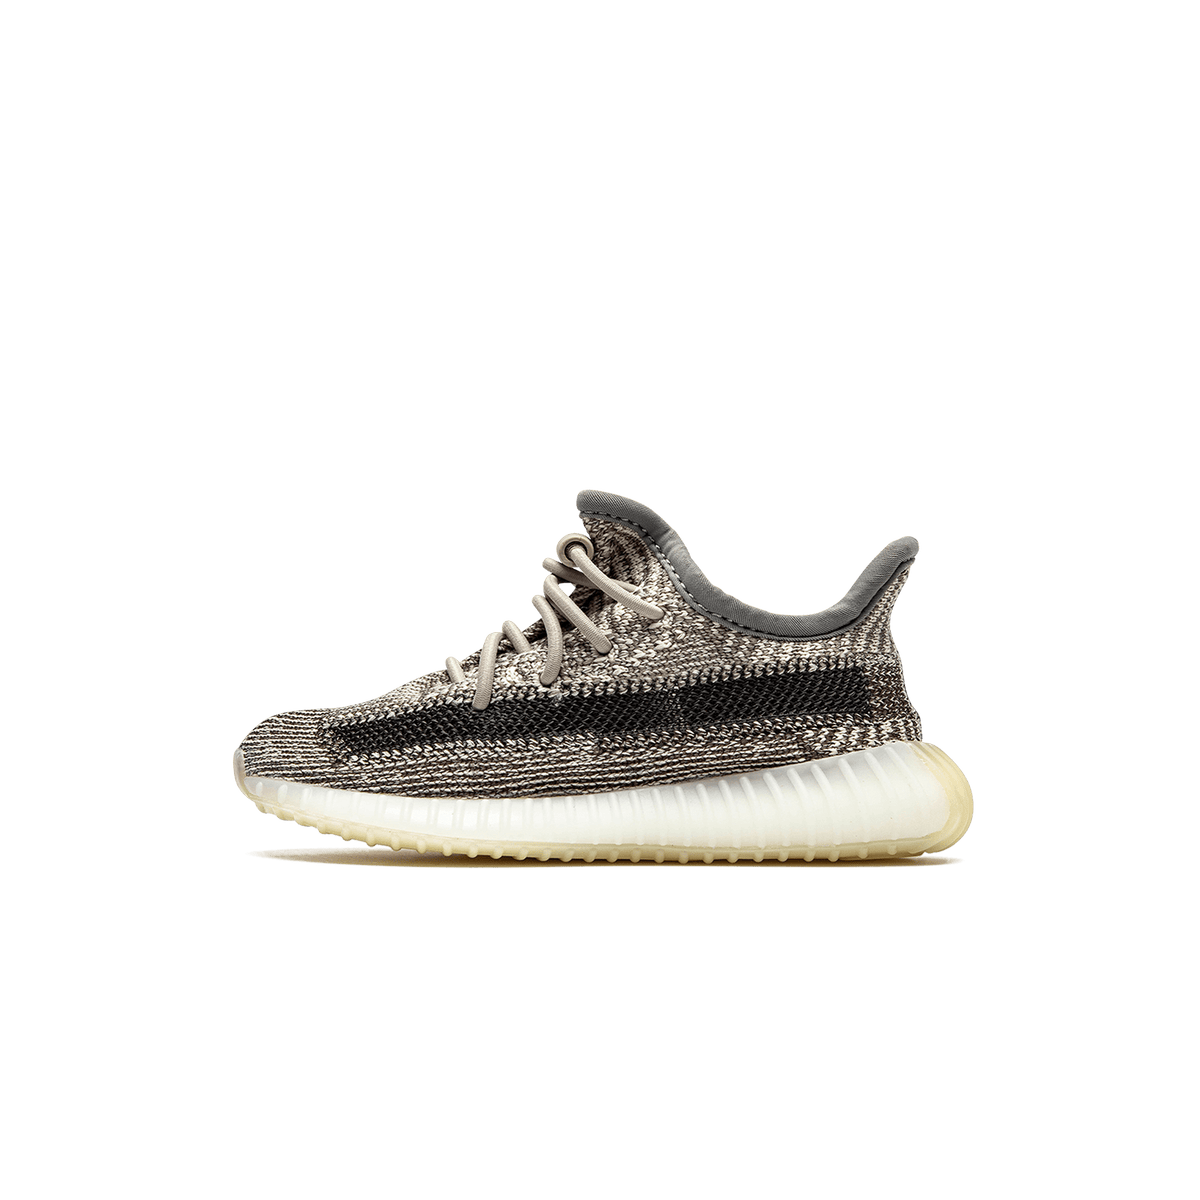 adidas bags Yeezy Boost 350 V2 Infant Zyon